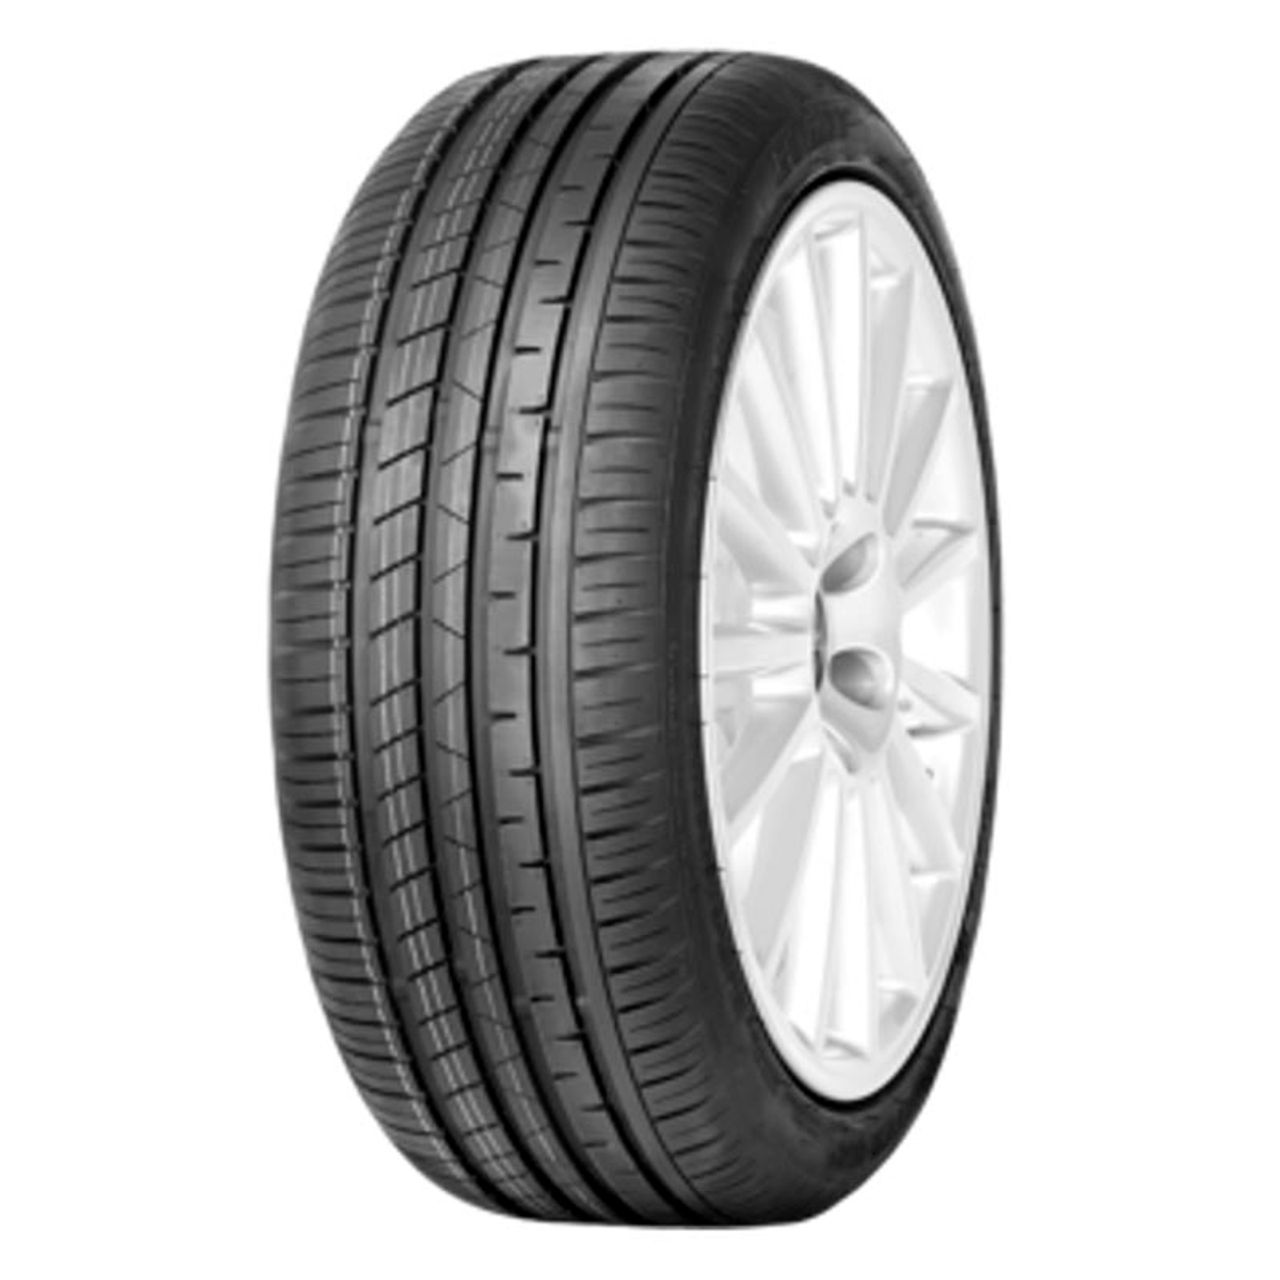 EVENT POTENTEM UHP 205/55R16 94W BSW